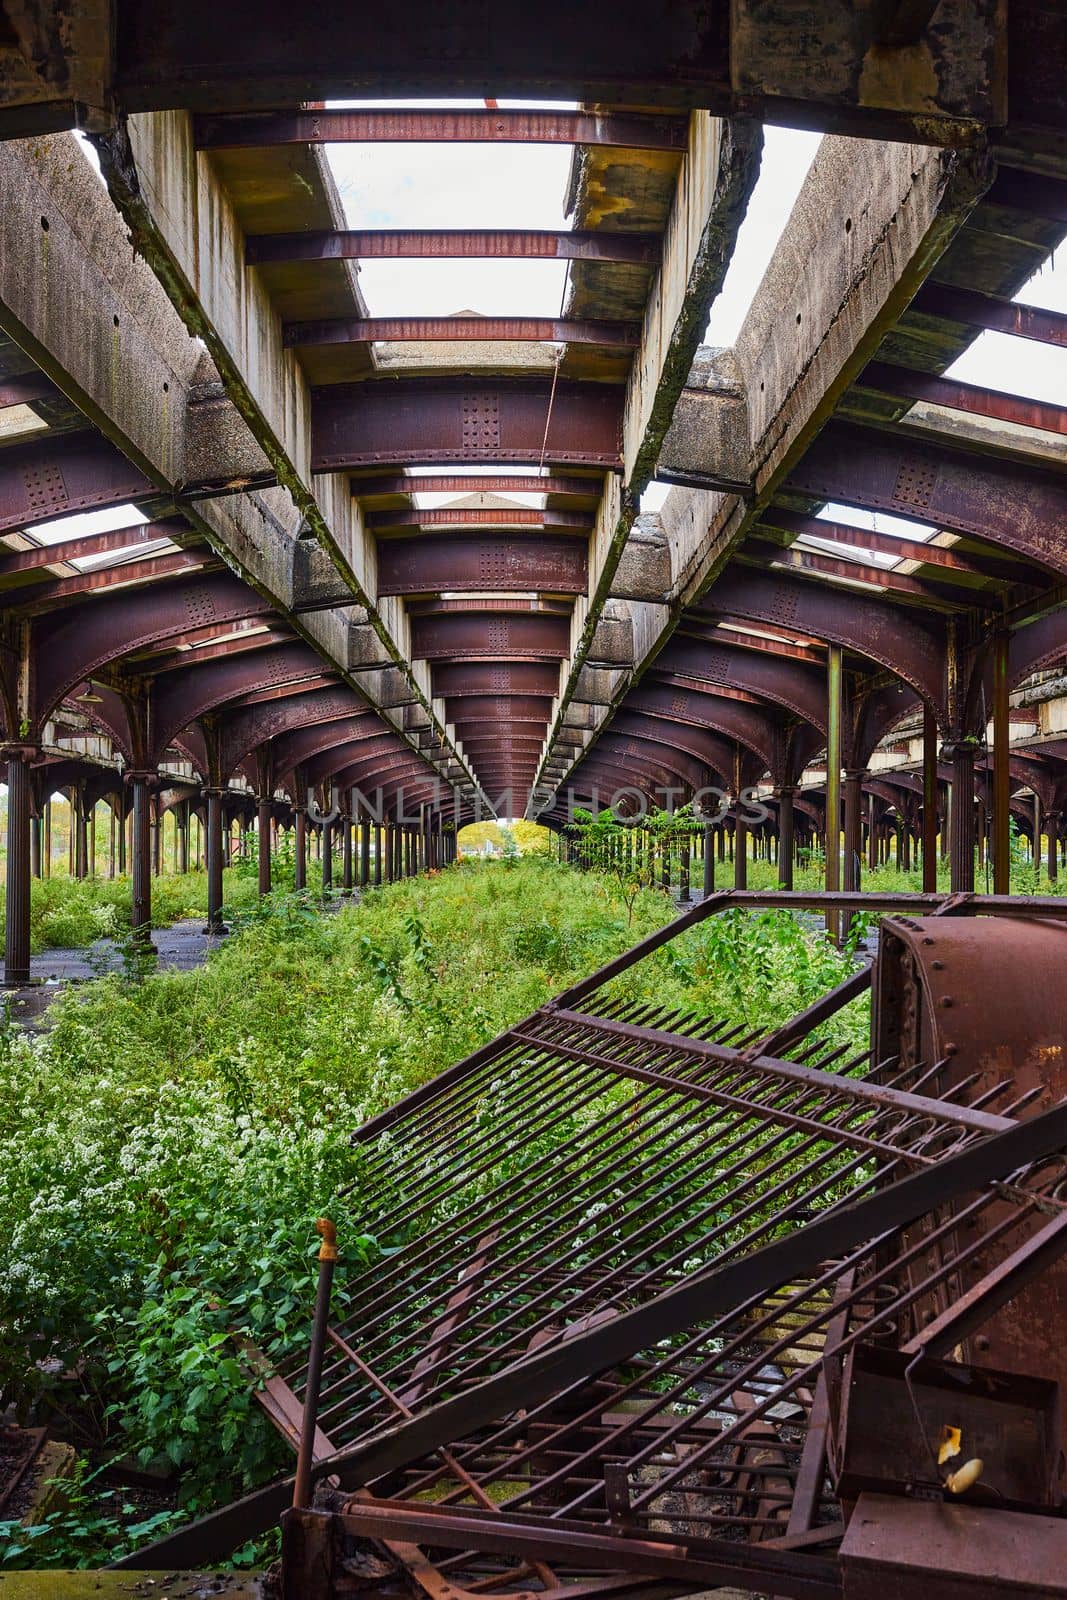 Image of Collapsed gate and overgrowth in abandoned outside train station with rusted ceiling